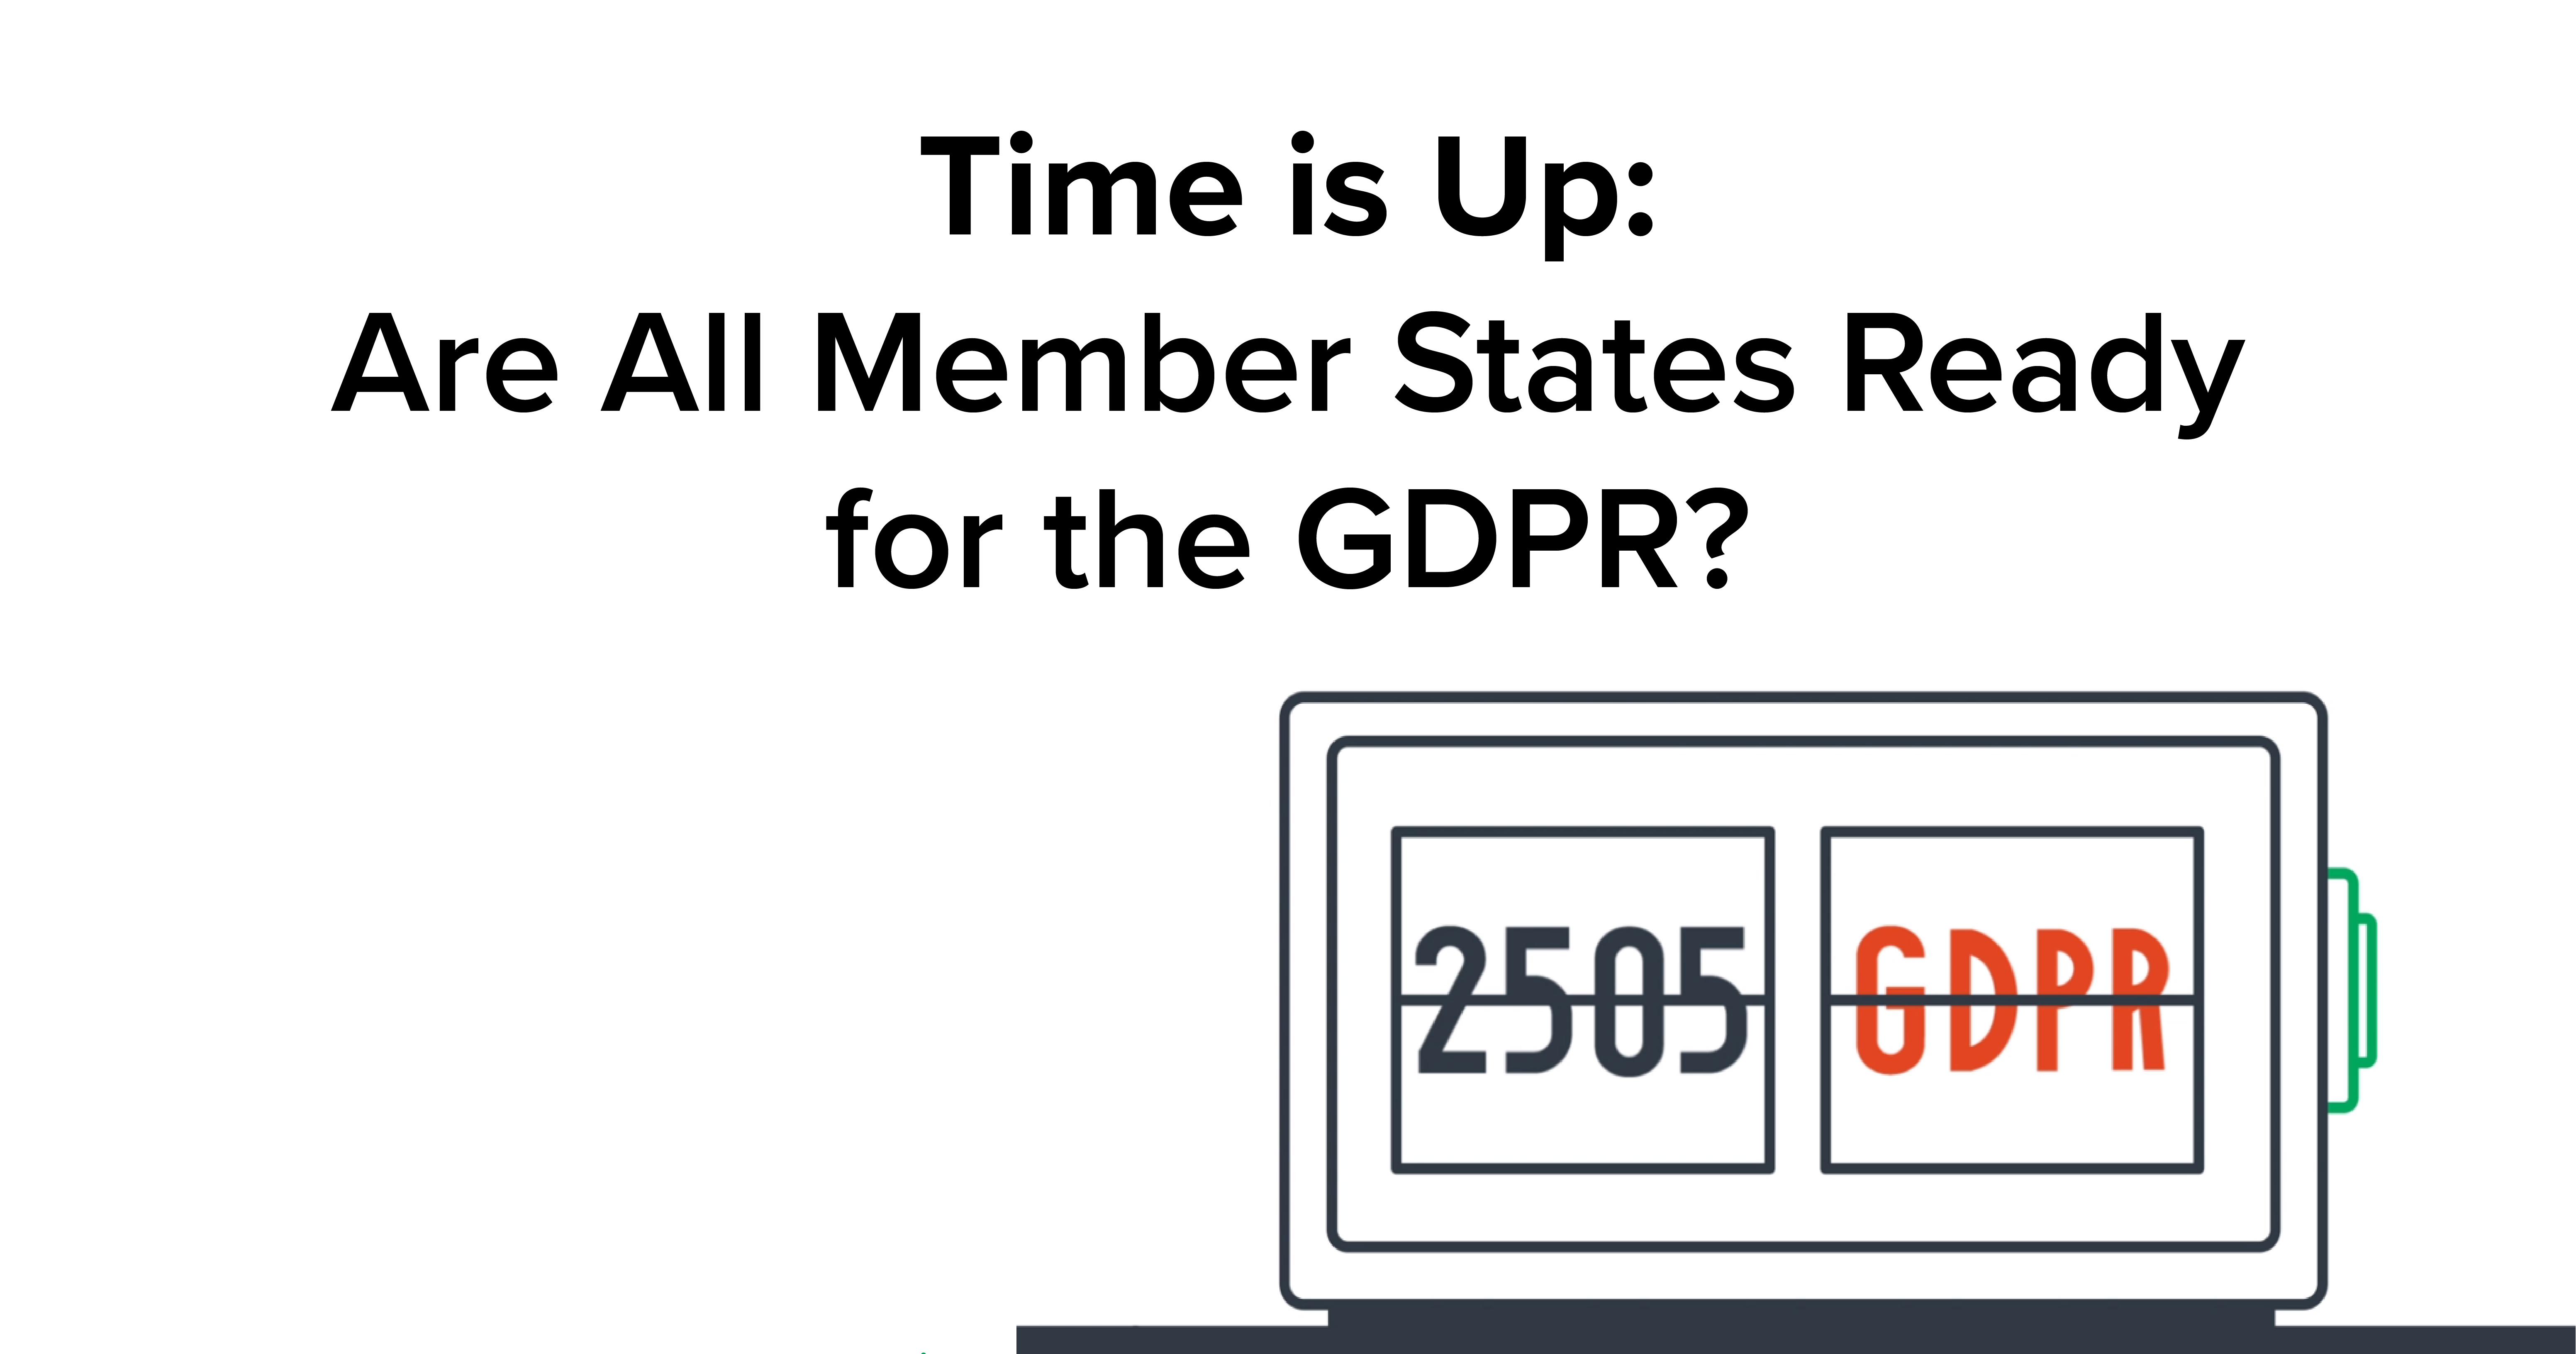 Time is Up: Are All Member States Ready for the GDPR?